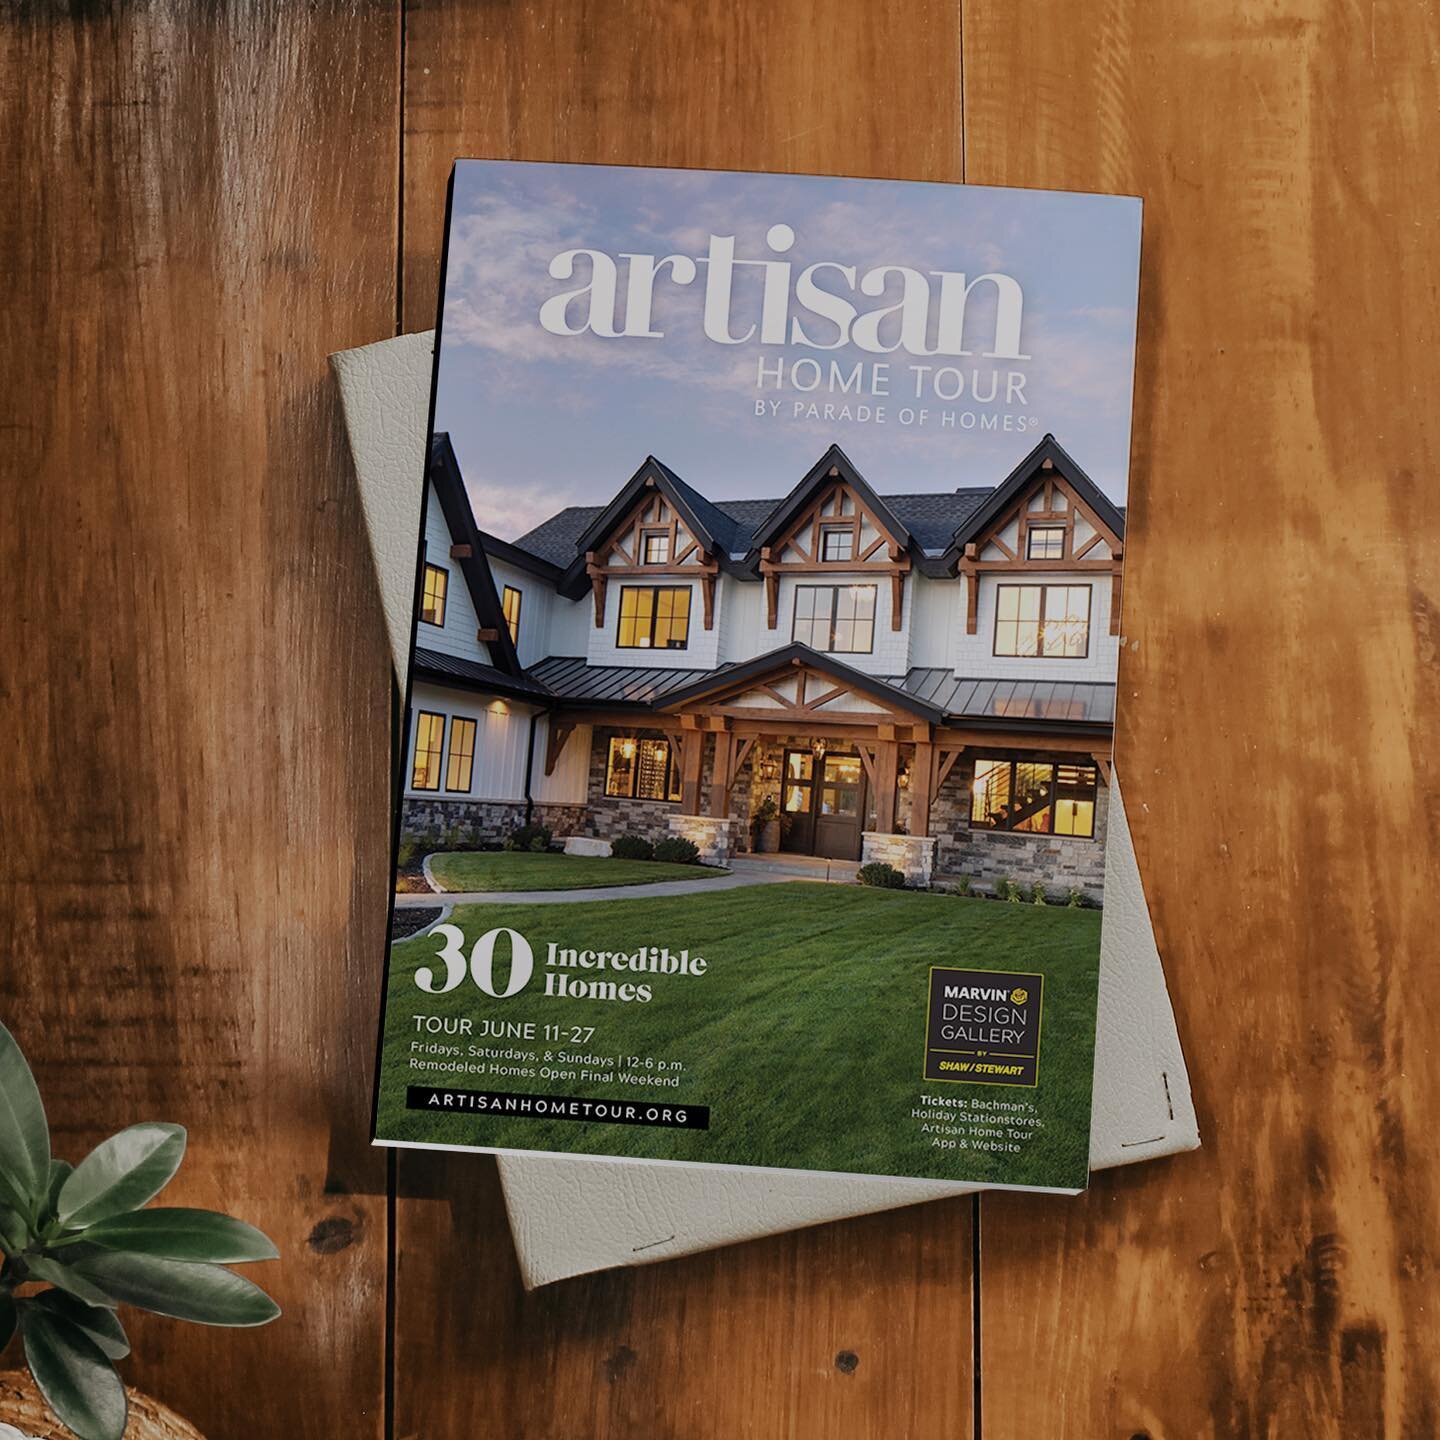 Last chance to see the best of the best only on the Artisan Home Tour! Tour 30 spectacular homes June 25-27. View the guidebook at ArtisanHomeTour.org or pick up your free copy at Bachman&rsquo;s.